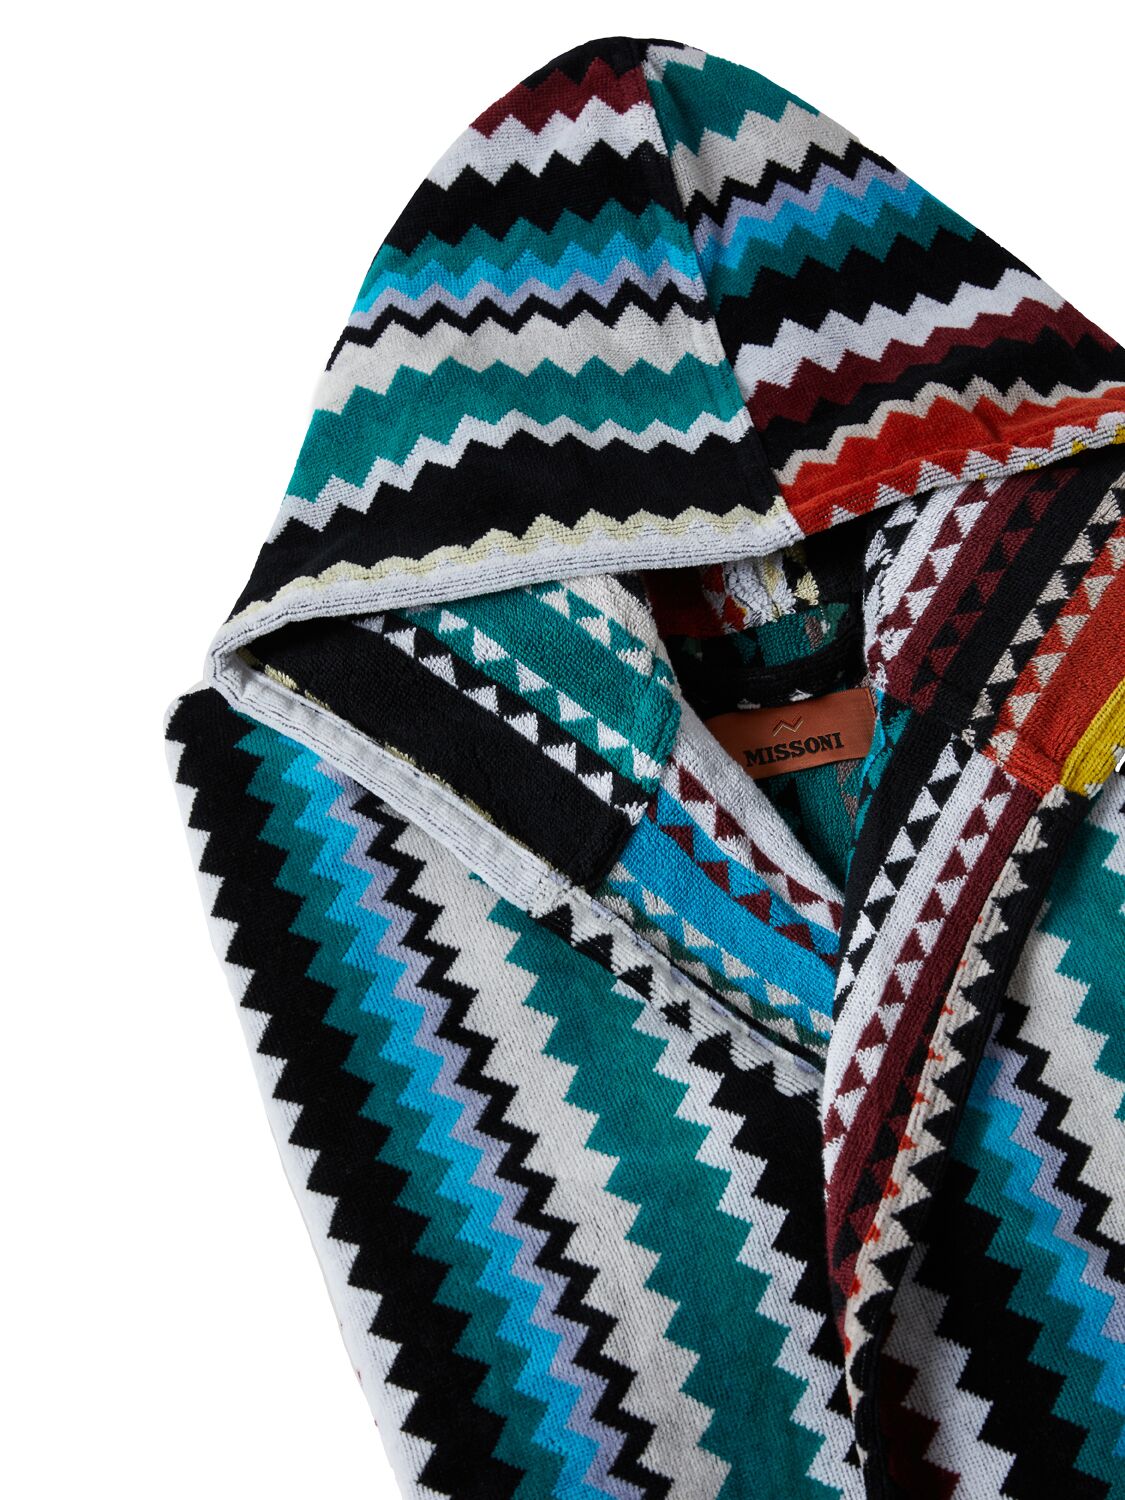 Shop Missoni Home Collection Curt Hooded Bathrobe In Multicolor